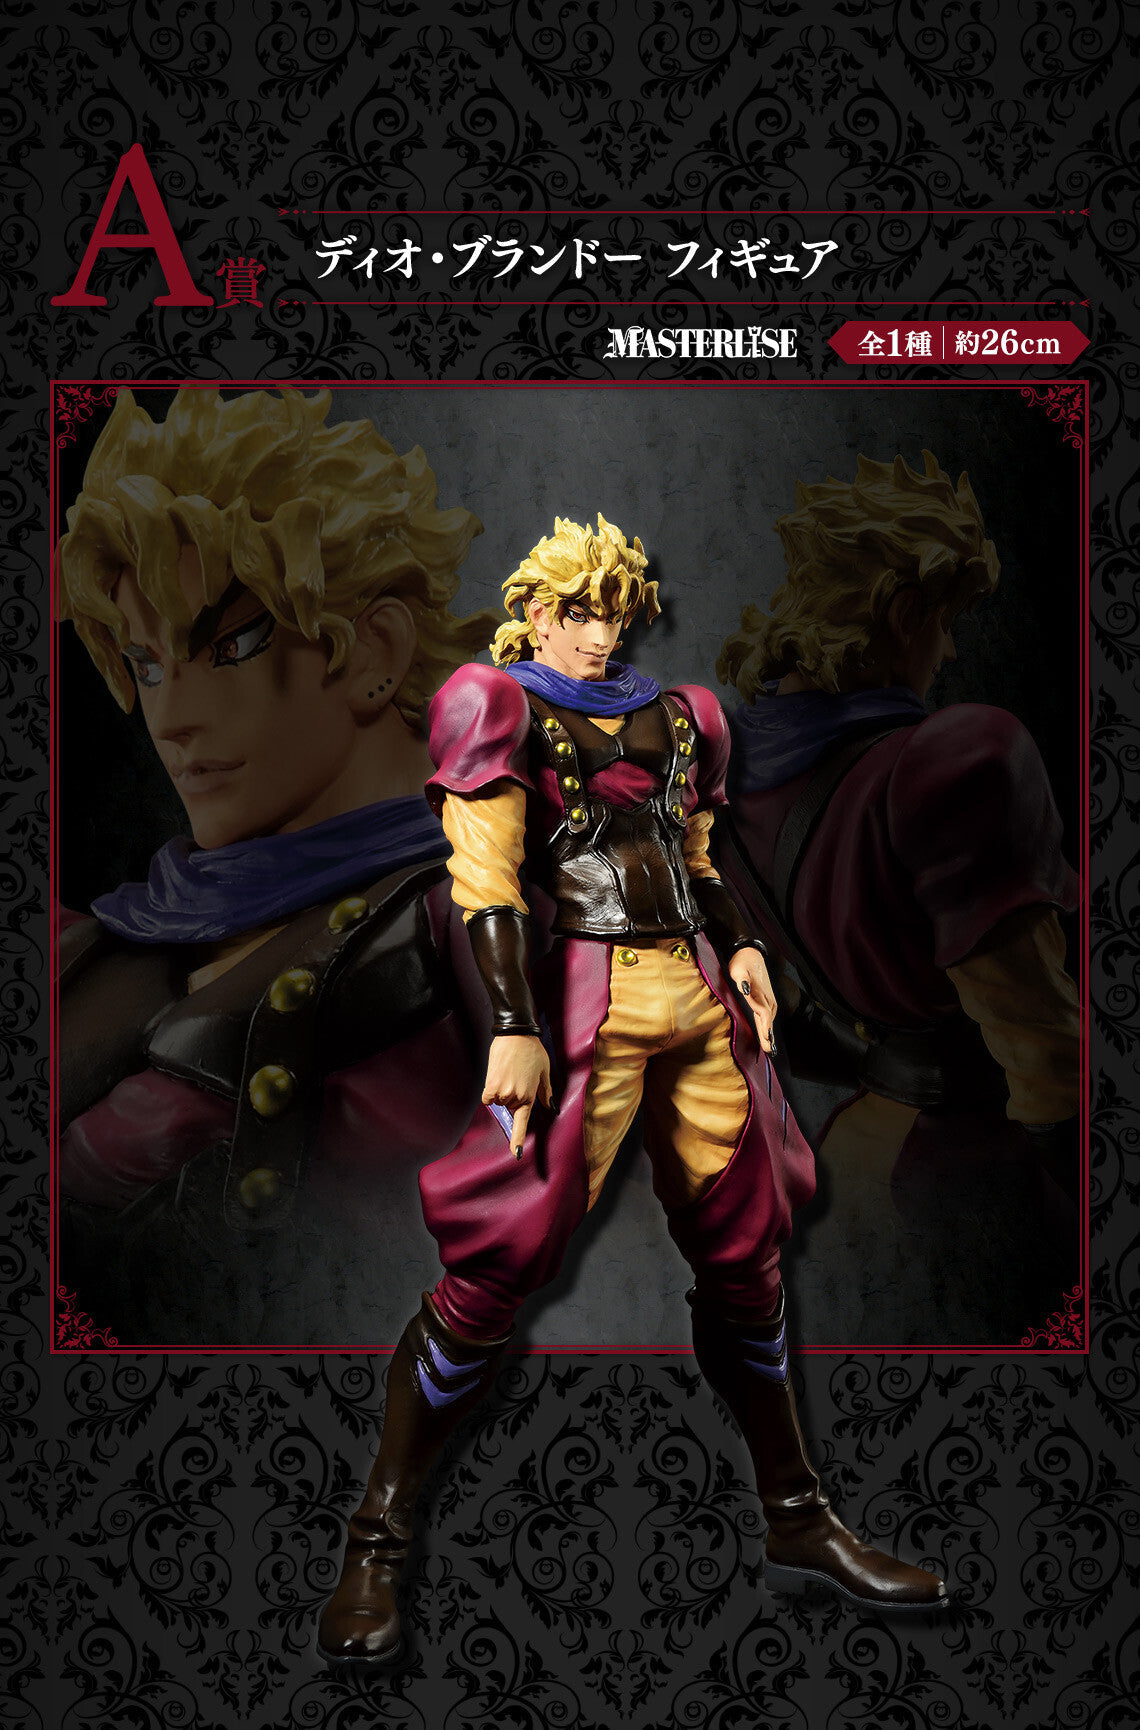 JoJo's Bizarre Adventure - Phantom Blood - Dio Brando - Ichiban Kuji JoJo's Bizarre Adventure Evil Party - Masterlise - A Prize (Bandai Spirits), Franchise: JoJo's Bizarre Adventure, Phantom Blood, Brand: Bandai Spirits, Release Date: 22. Aug 2023, Type: Prize, Dimensions: H=260mm (10.14in), Store Name: Nippon Figures